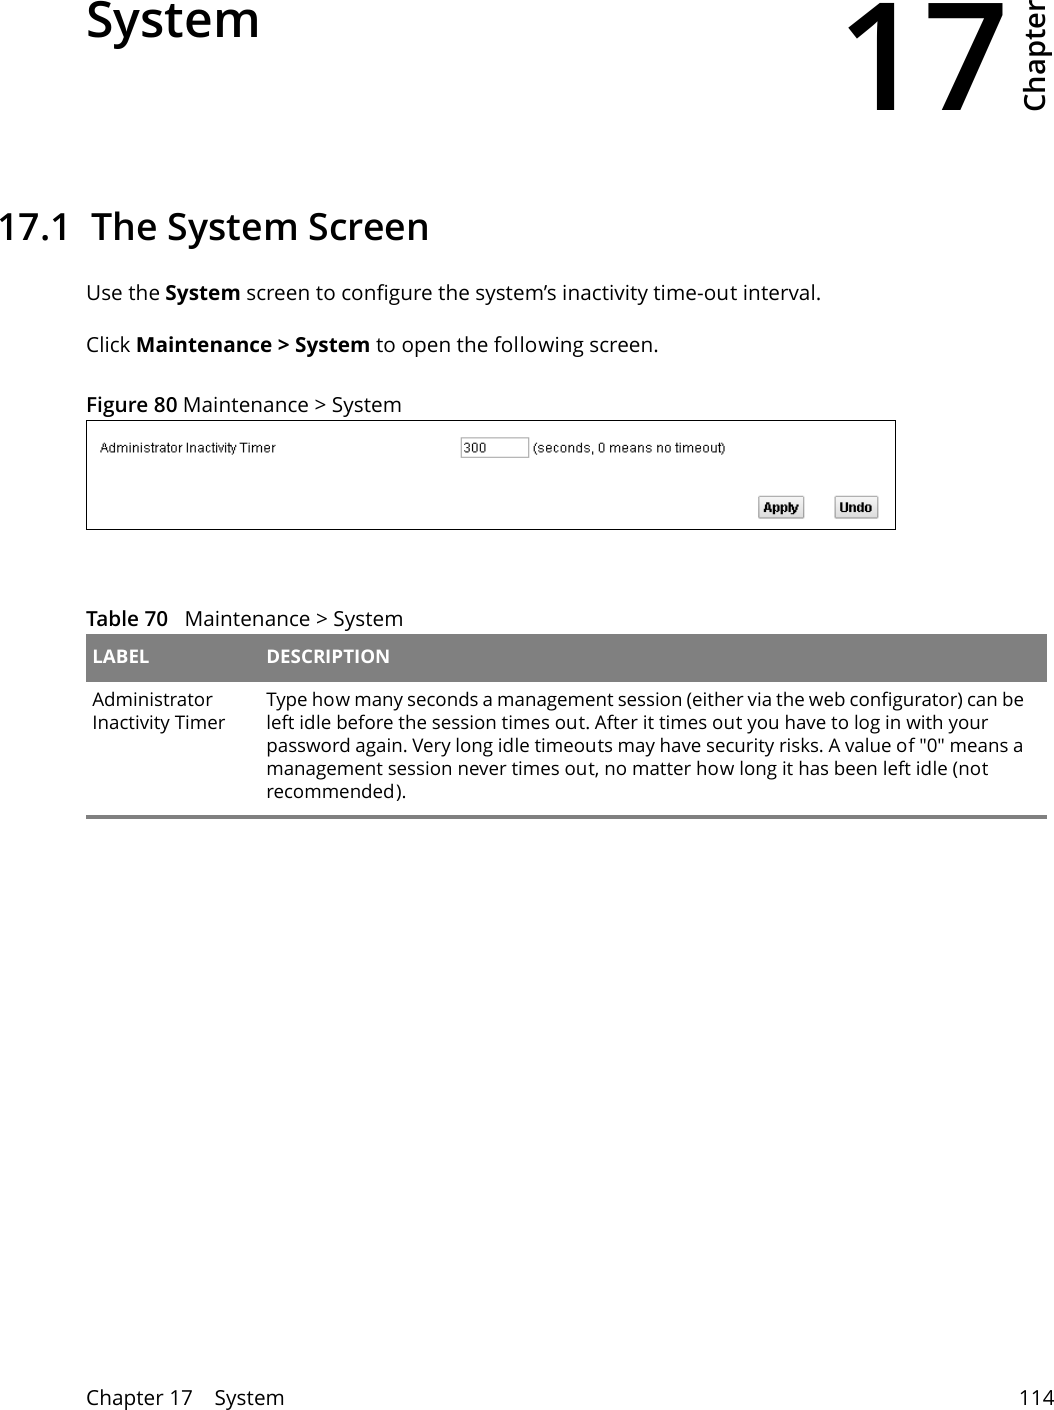 17Chapter Chapter 17    System 114CHAPTER 17 Chapter 17 System17.1  The System ScreenUse the System screen to configure the system’s inactivity time-out interval.Click Maintenance &gt; System to open the following screen. Figure 80 Maintenance &gt; System  Table 70   Maintenance &gt; System LABEL DESCRIPTIONAdministrator Inactivity TimerType how many seconds a management session (either via the web configurator) can be left idle before the session times out. After it times out you have to log in with your password again. Very long idle timeouts may have security risks. A value of &quot;0&quot; means a management session never times out, no matter how long it has been left idle (not recommended).